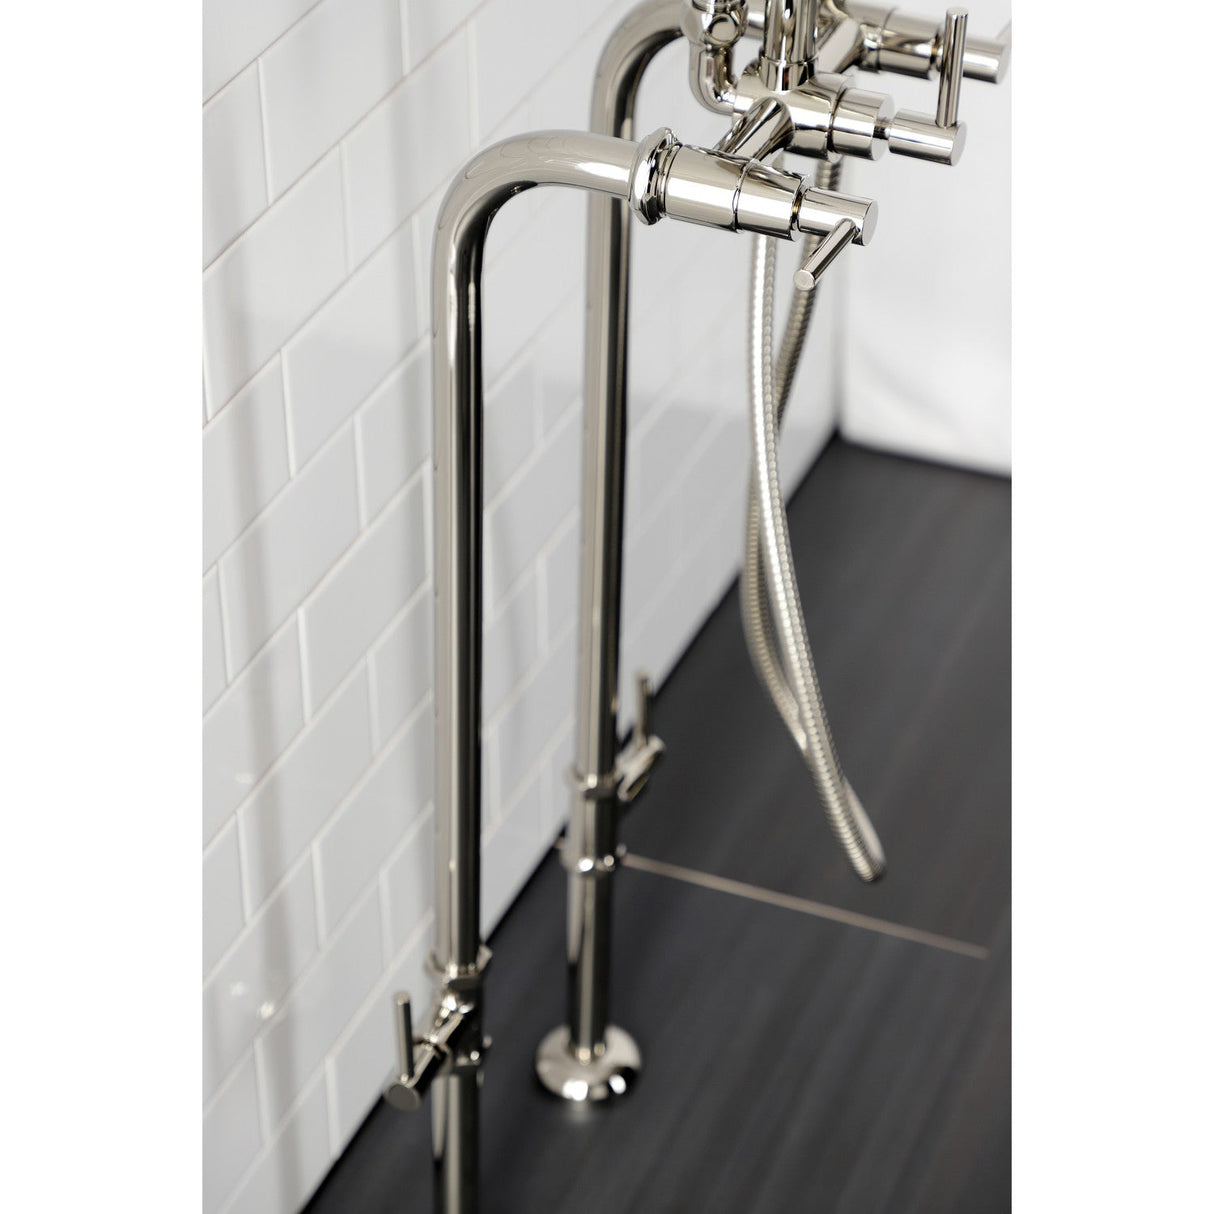 Concord CCK8106DL Freestanding Tub Faucet with Supply Line and Stop Valve, Polished Nickel